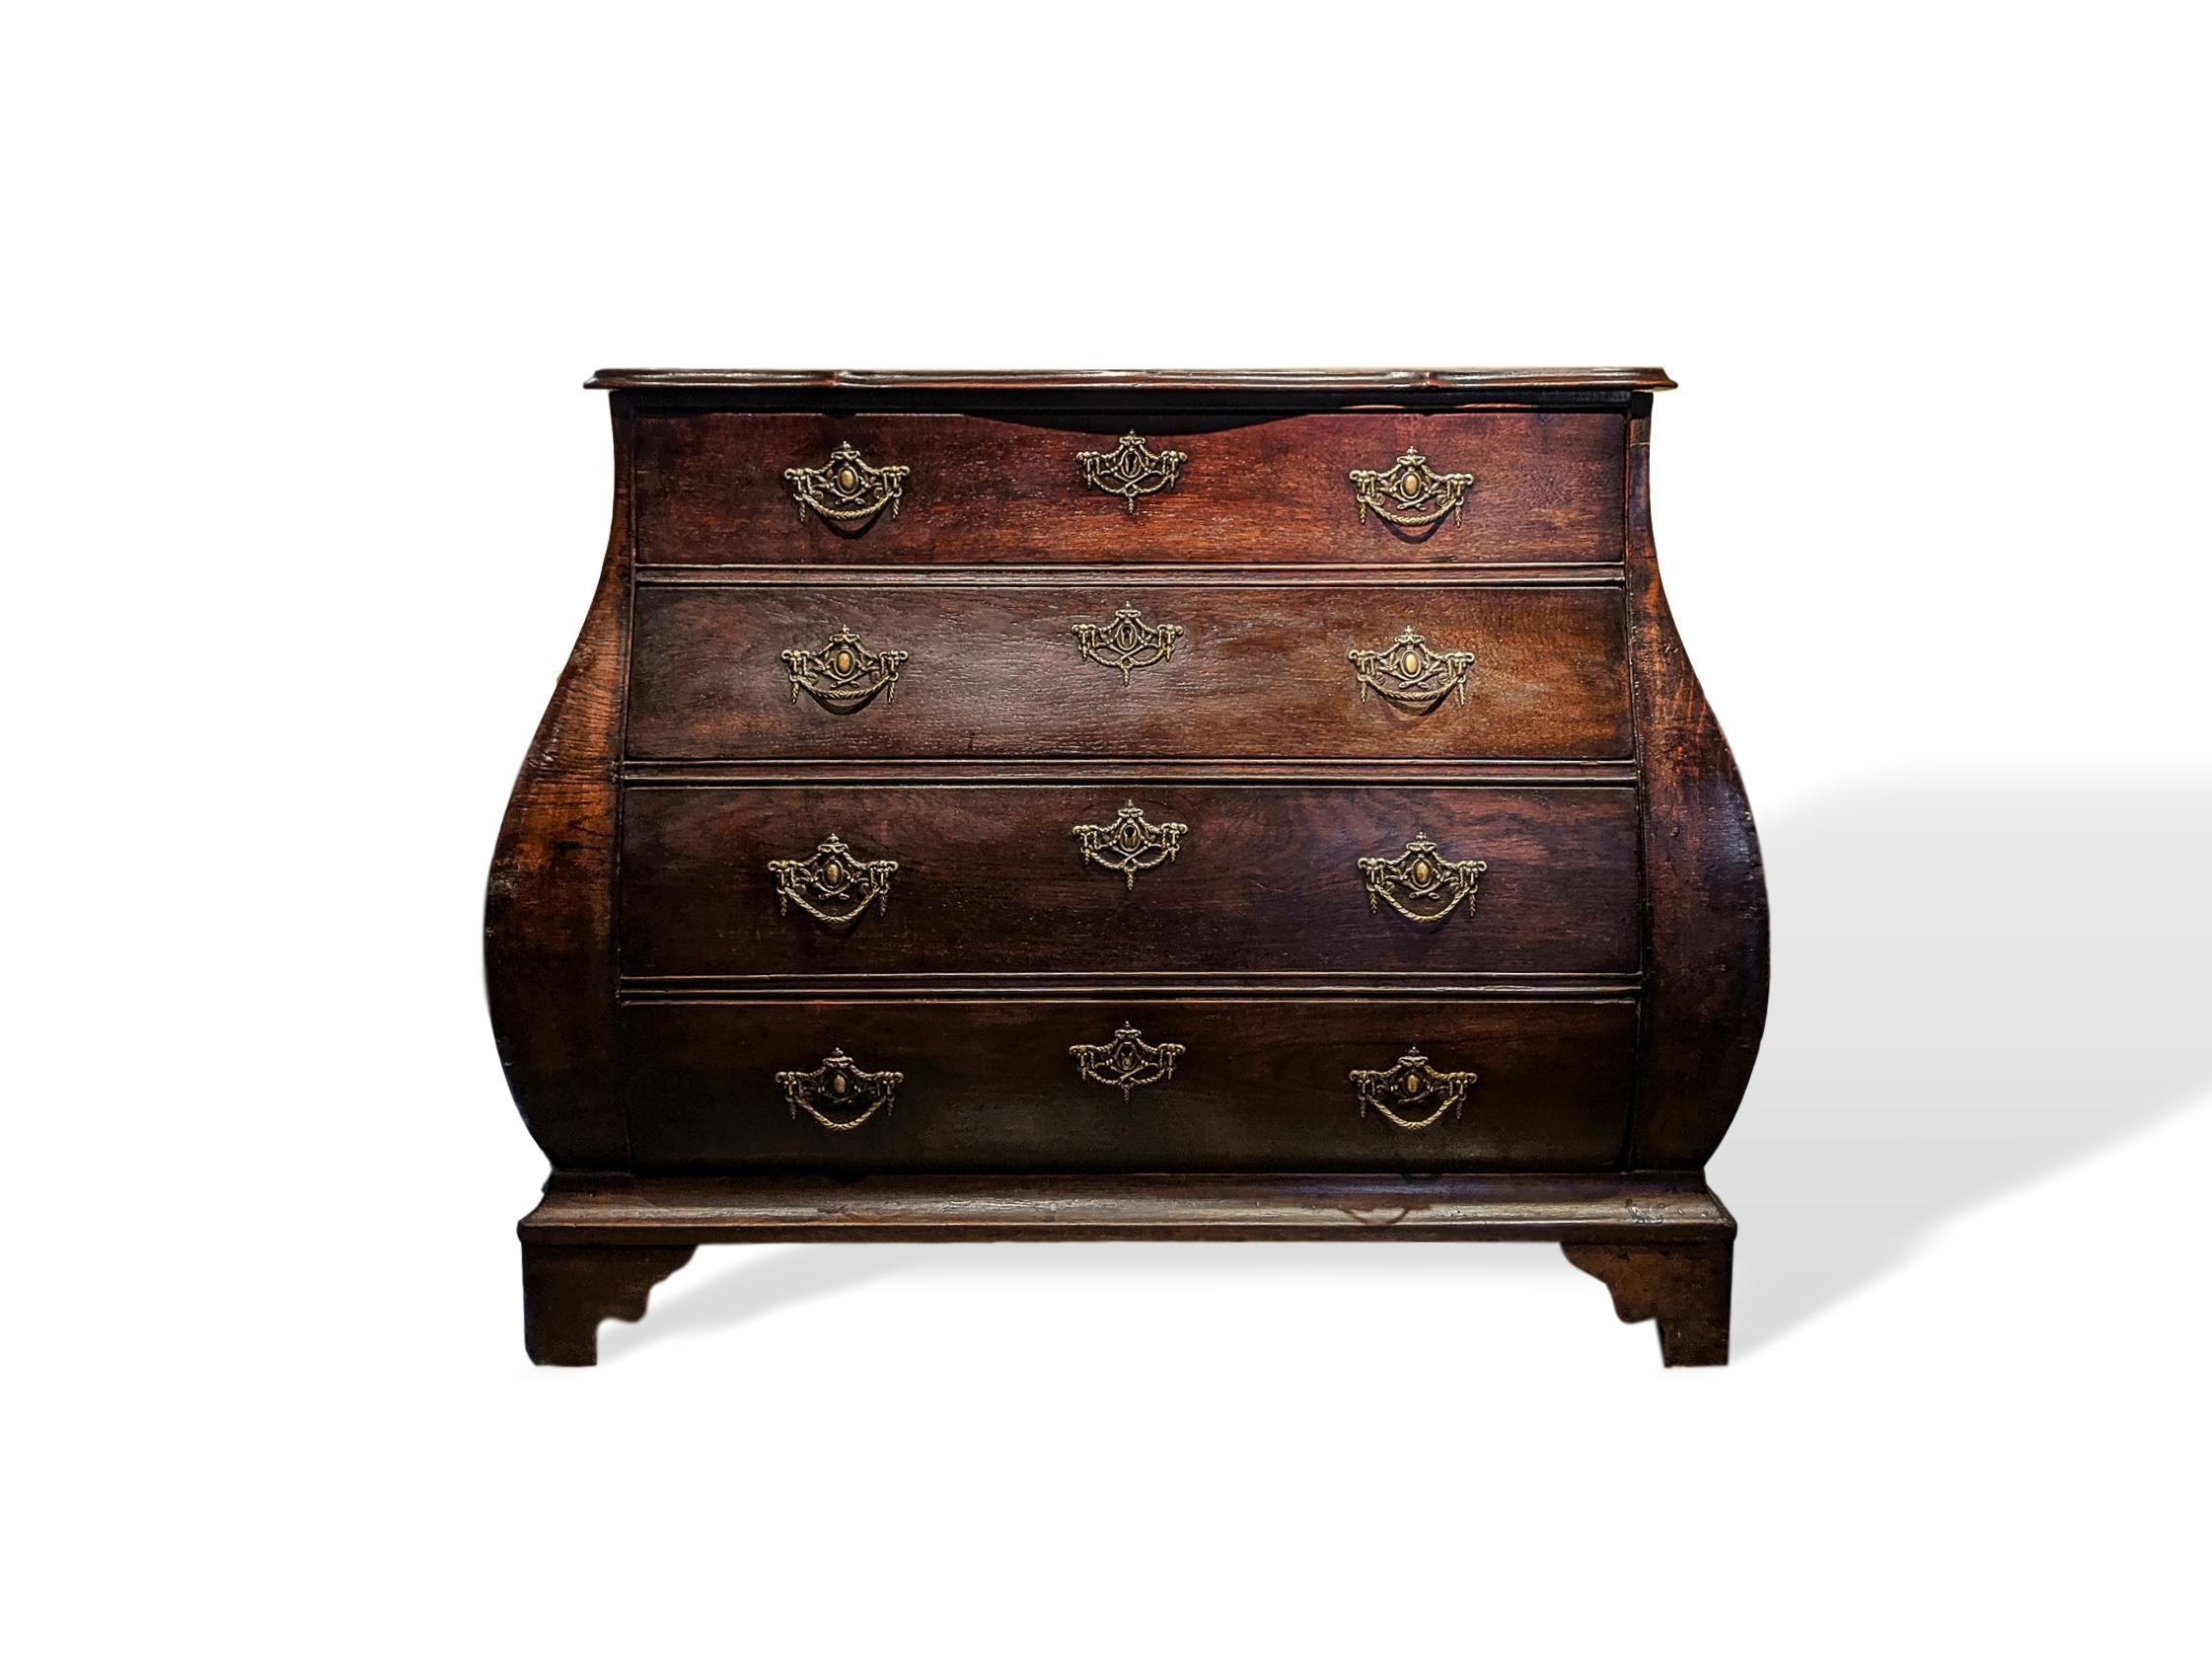 18th century Dutch Baroque oak Bombé commode/chest, elaborate, original hardware, the shaped and molded top, over four graduated drawers, on a molded plinth with shaped bracket feet; the finely cast, intricate solid brass hardware is original to the